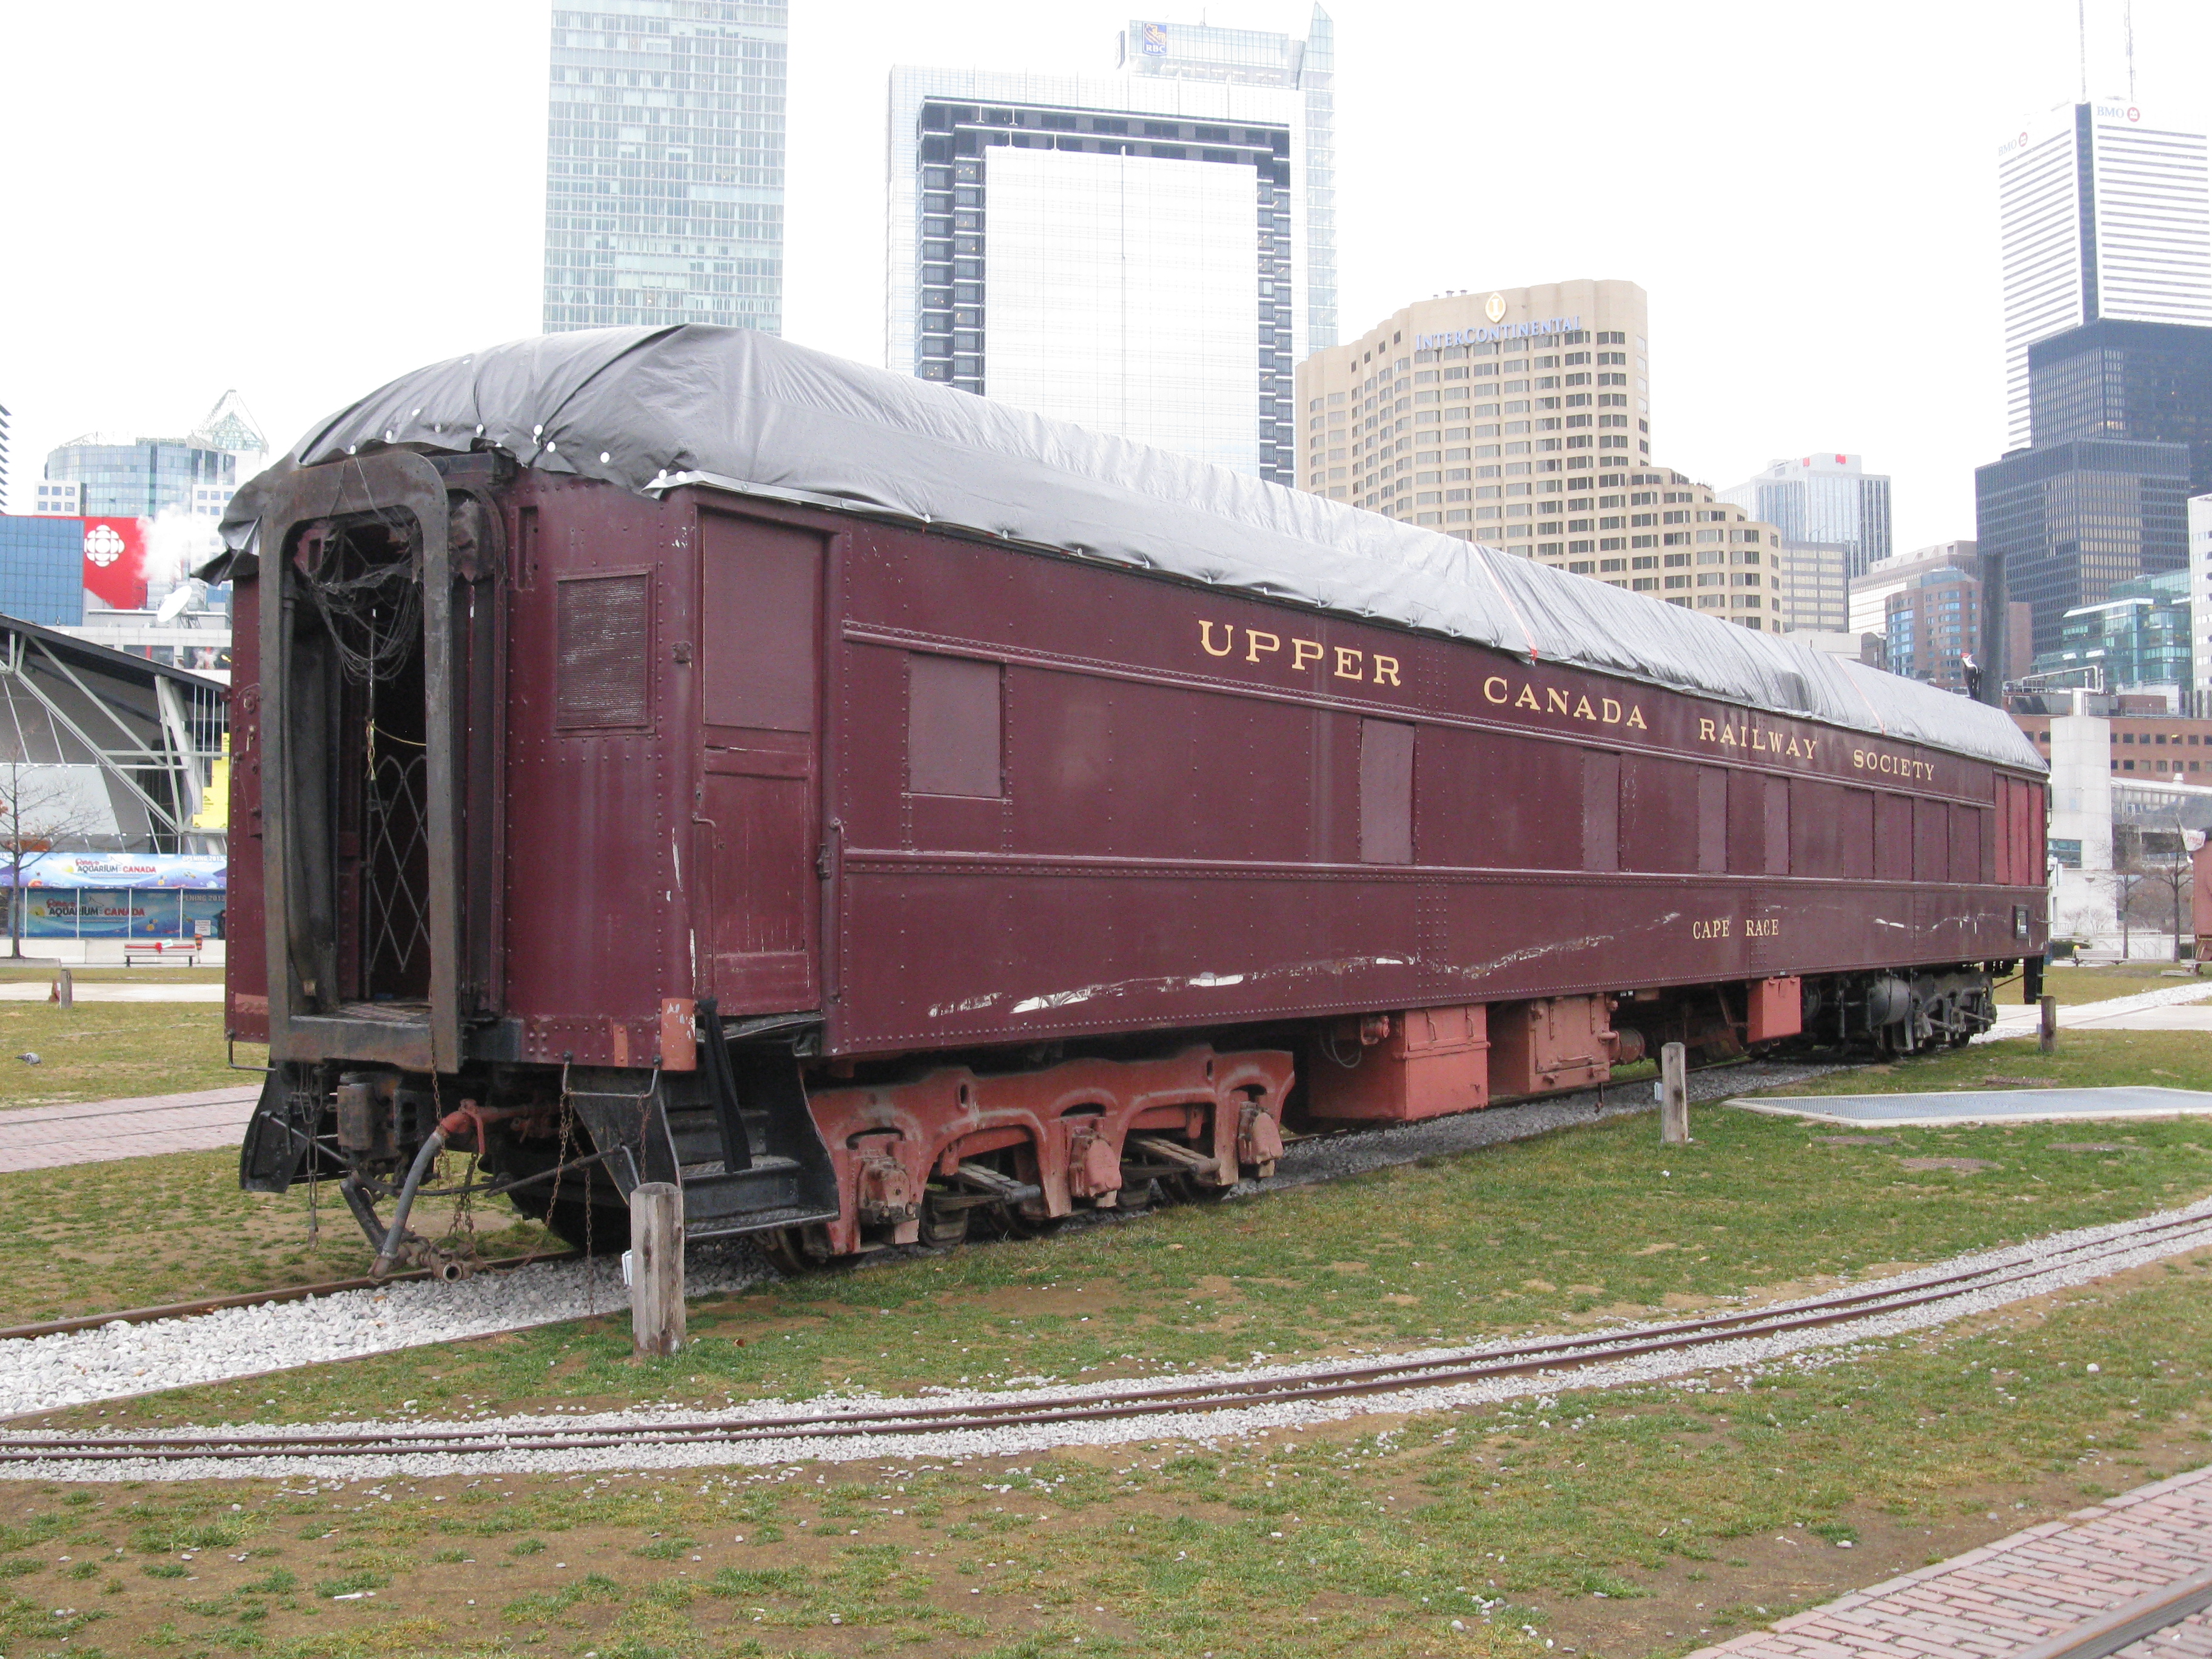 Outdoor railway museum south of the cn tower, 2013 01 10 (23) photo